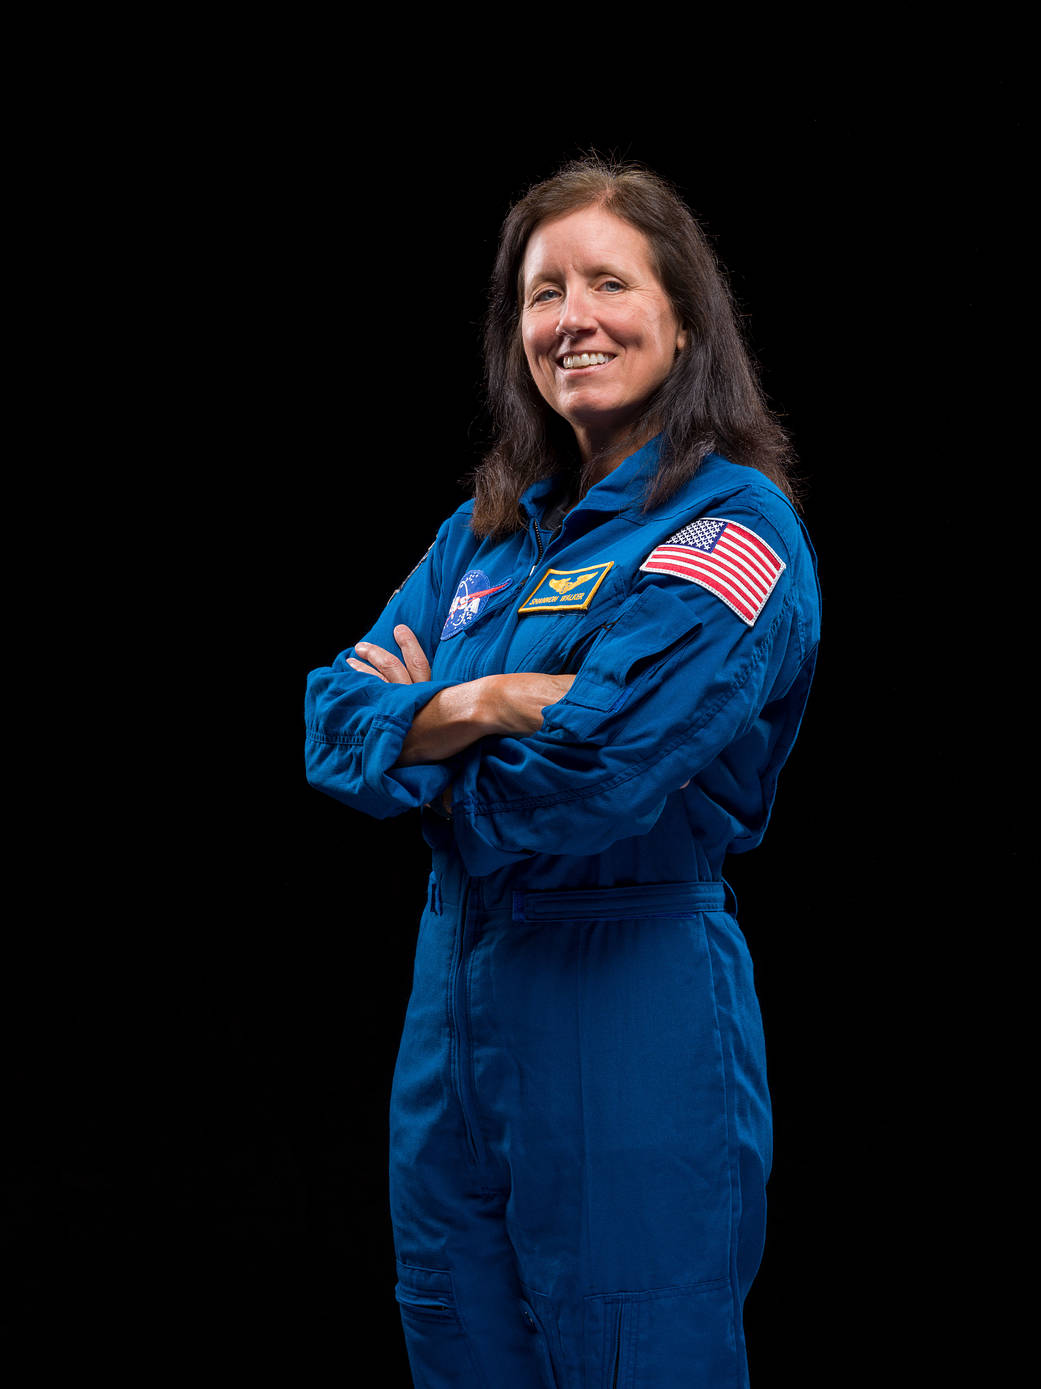 SpaceX Crew-1 Mission Specialist Shannon Walker of NASA